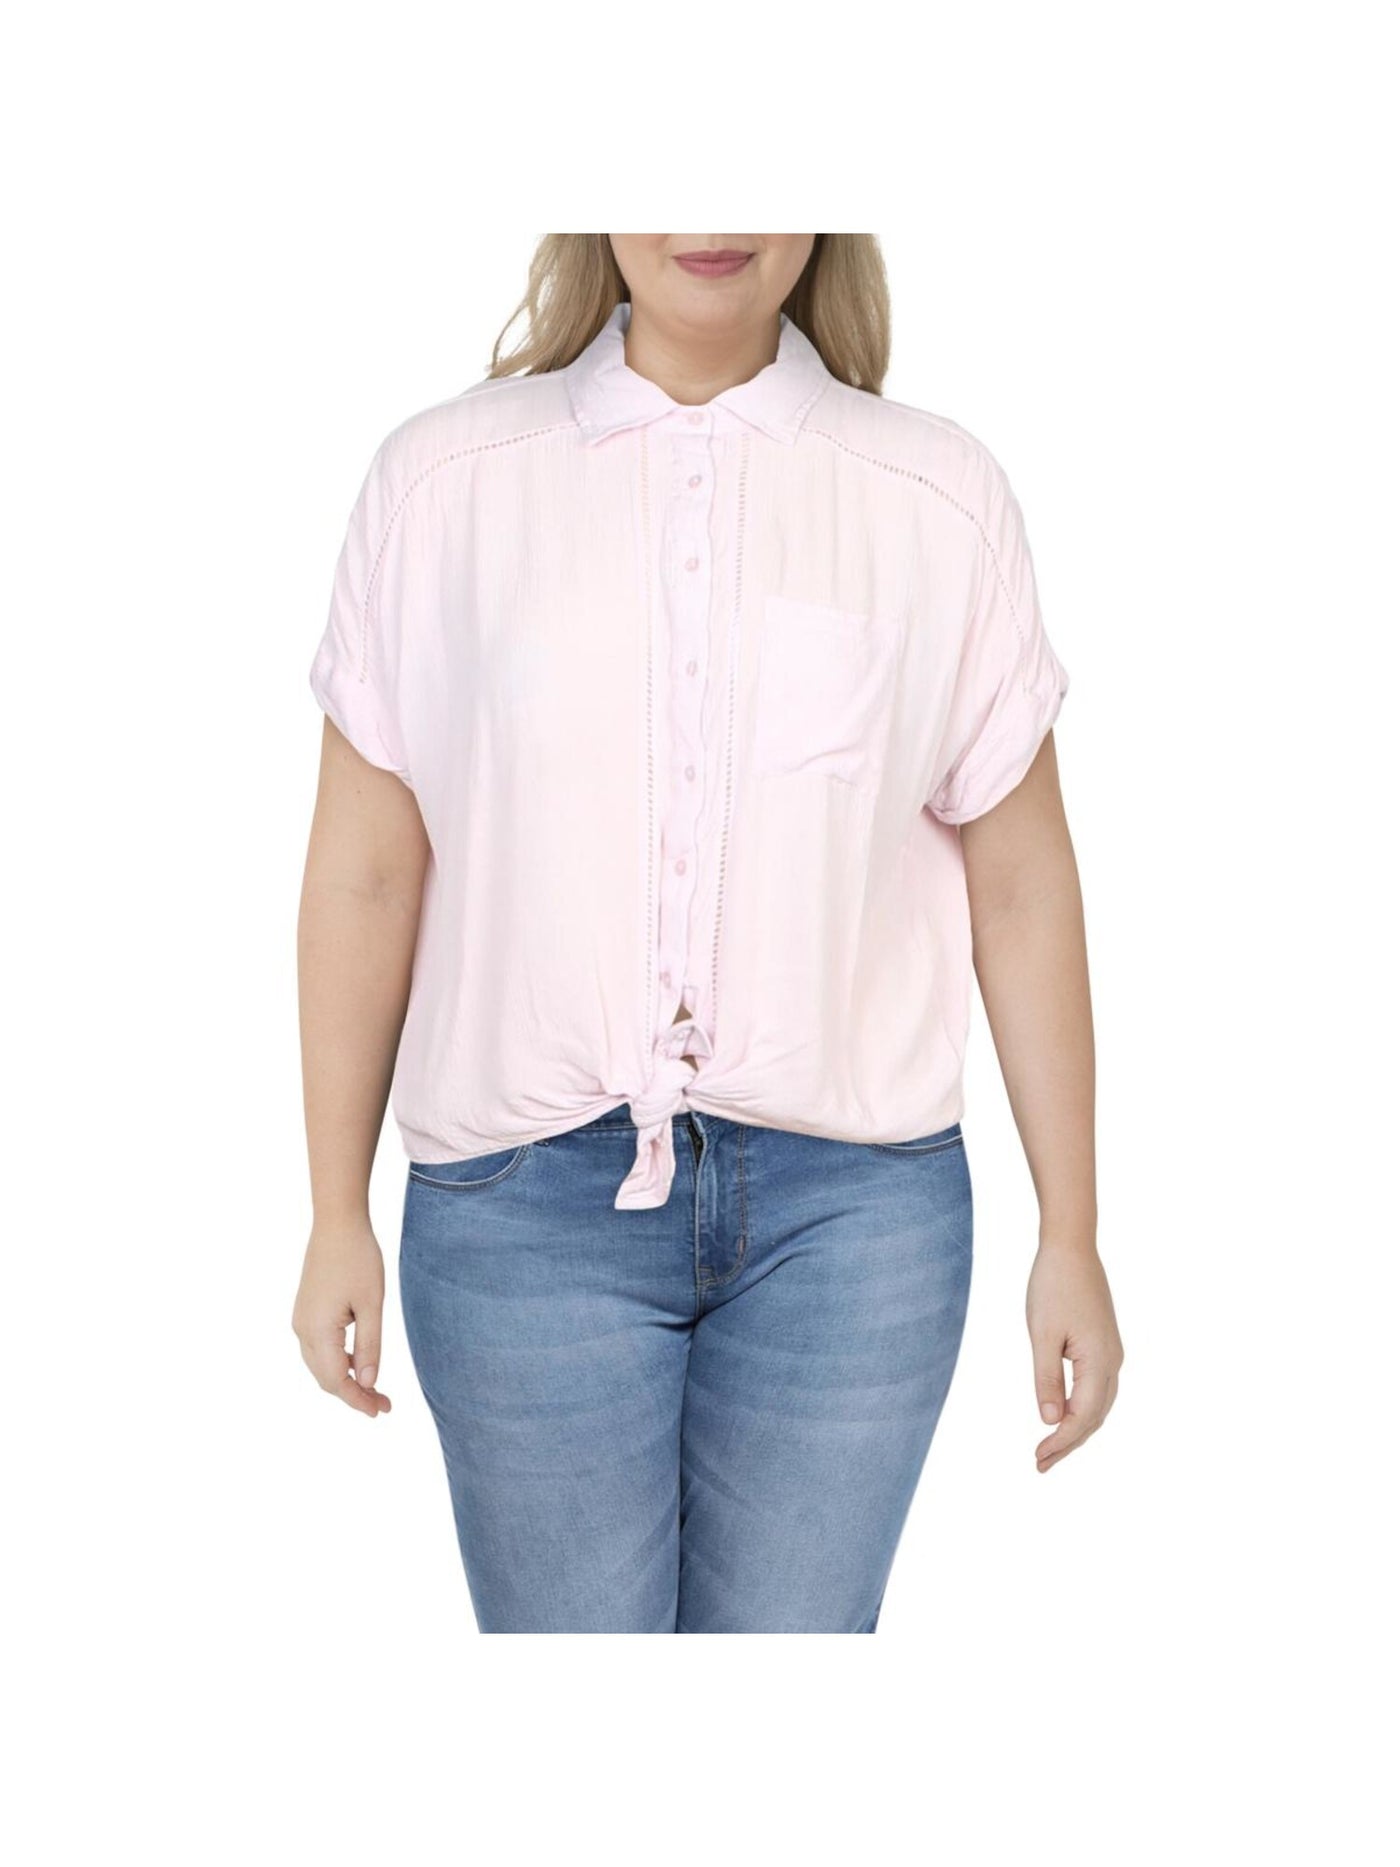 PLANET GOLD Womens Pink Pocketed Tie Front Short Sleeve Collared Button Up Top Juniors L